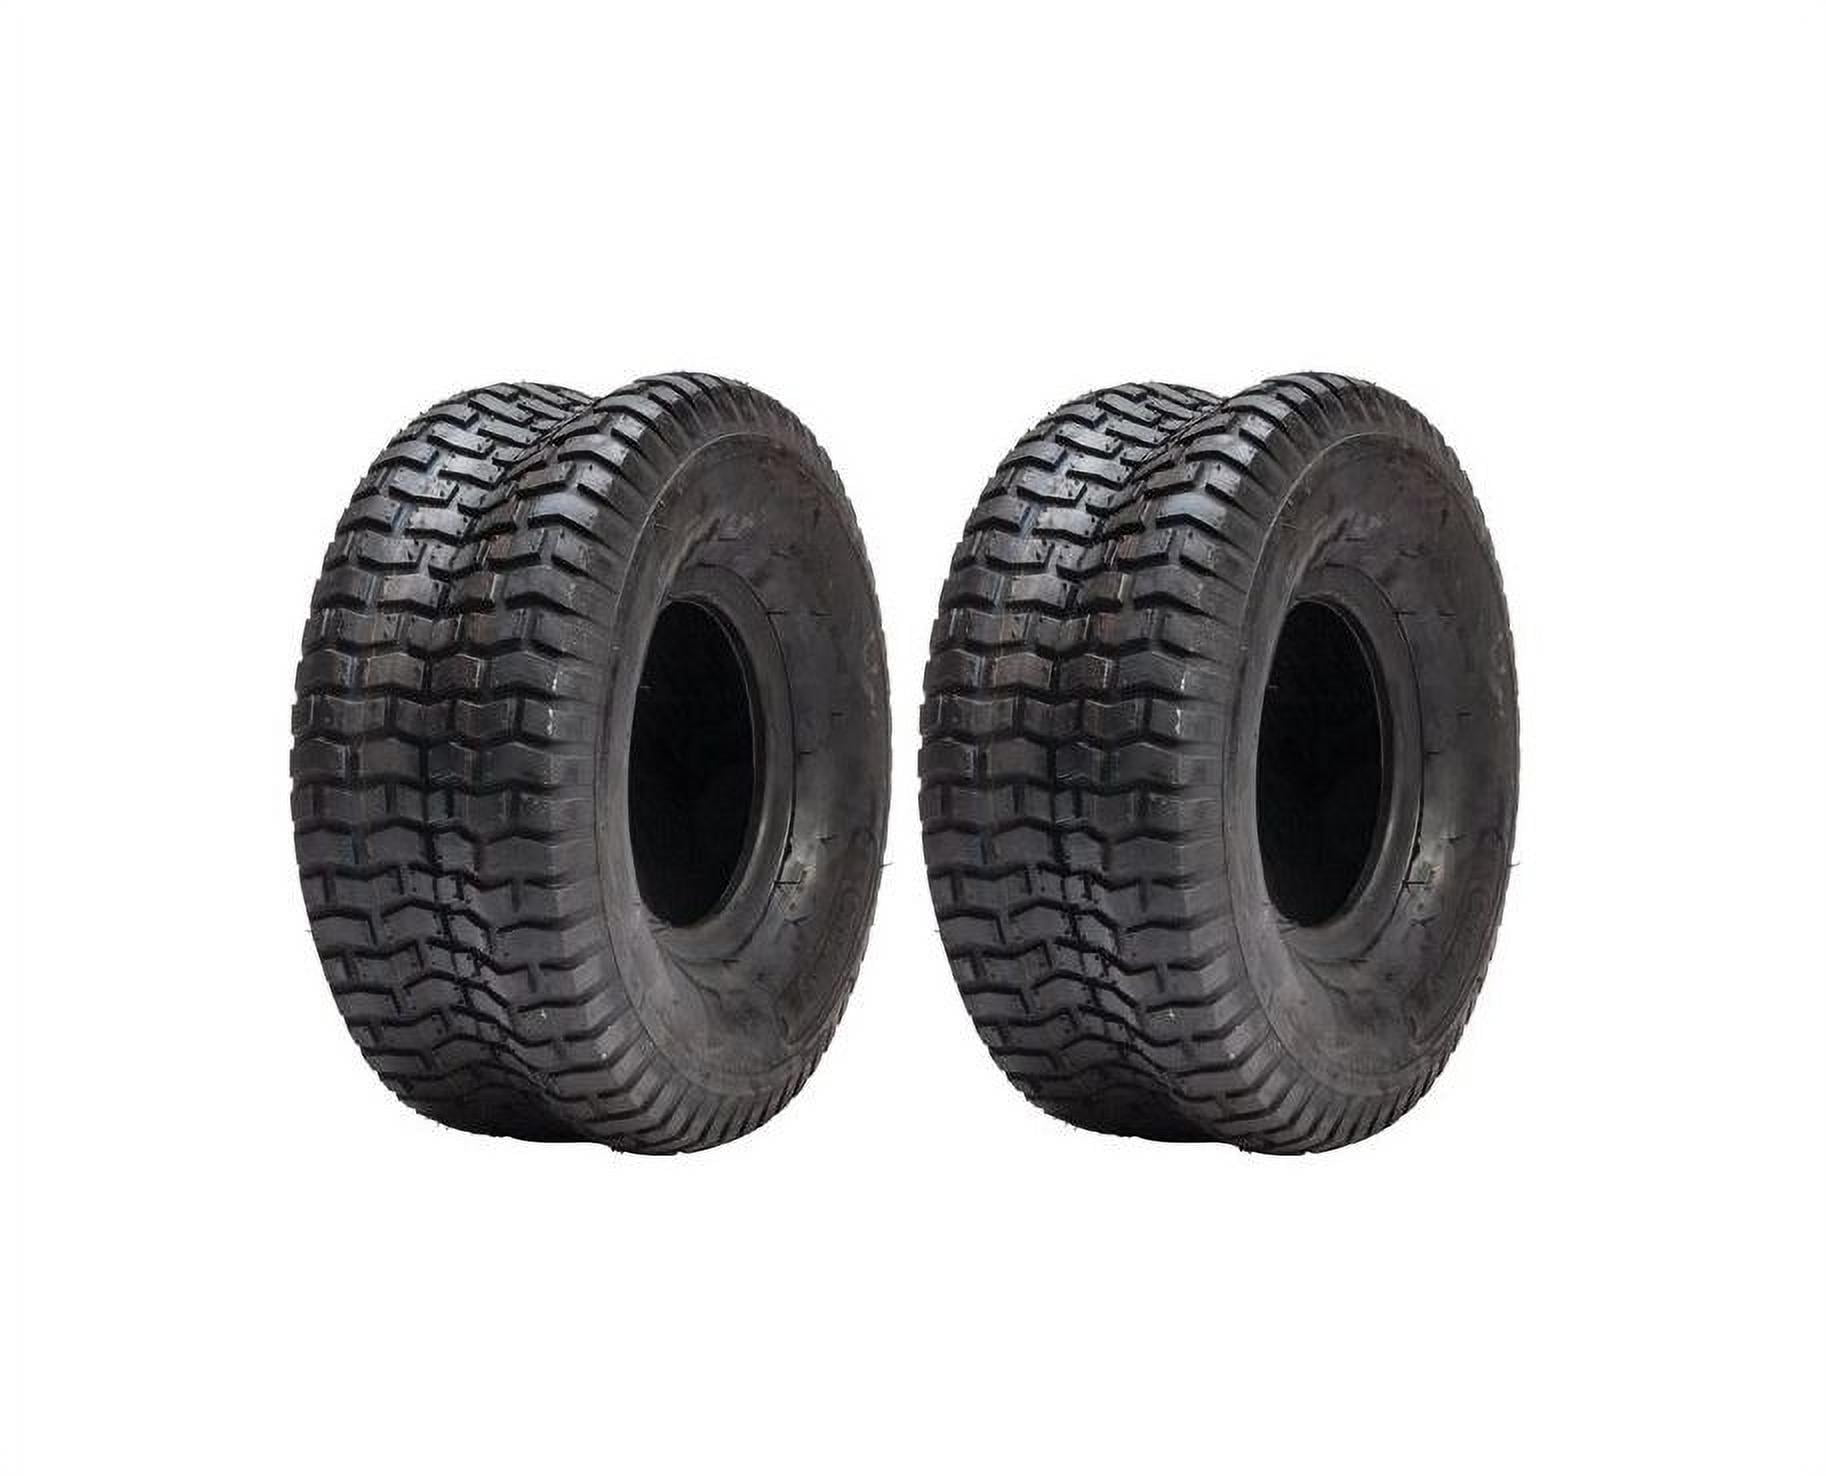 15x6.00-6 Tires & Wheels 4 Ply for Lawn & Garden Mower Turf Tires .75 Bearing Set of 2 